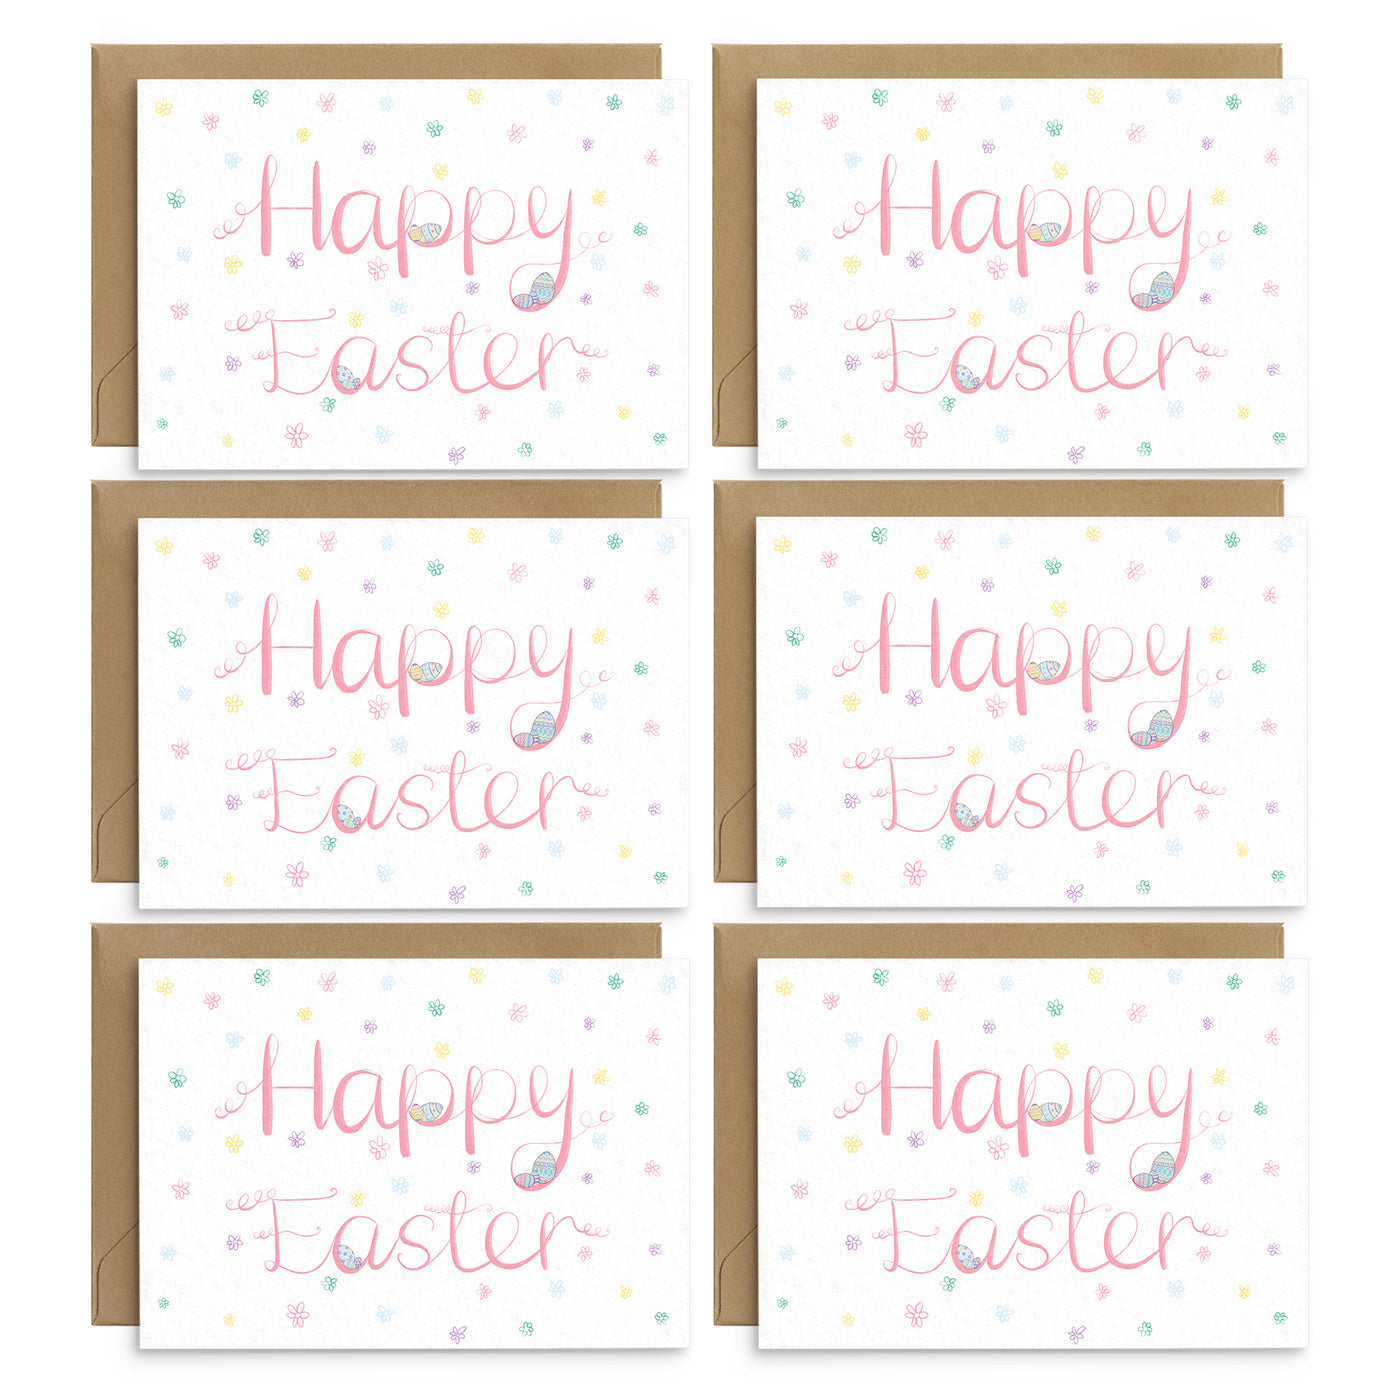 A pack of easter greetings cards with pink writing and pastel coloured easter egg illustrations. 6 white cards are laid onto of brown recycled envelopes. Easter Greetings cards by Poppins and Co.